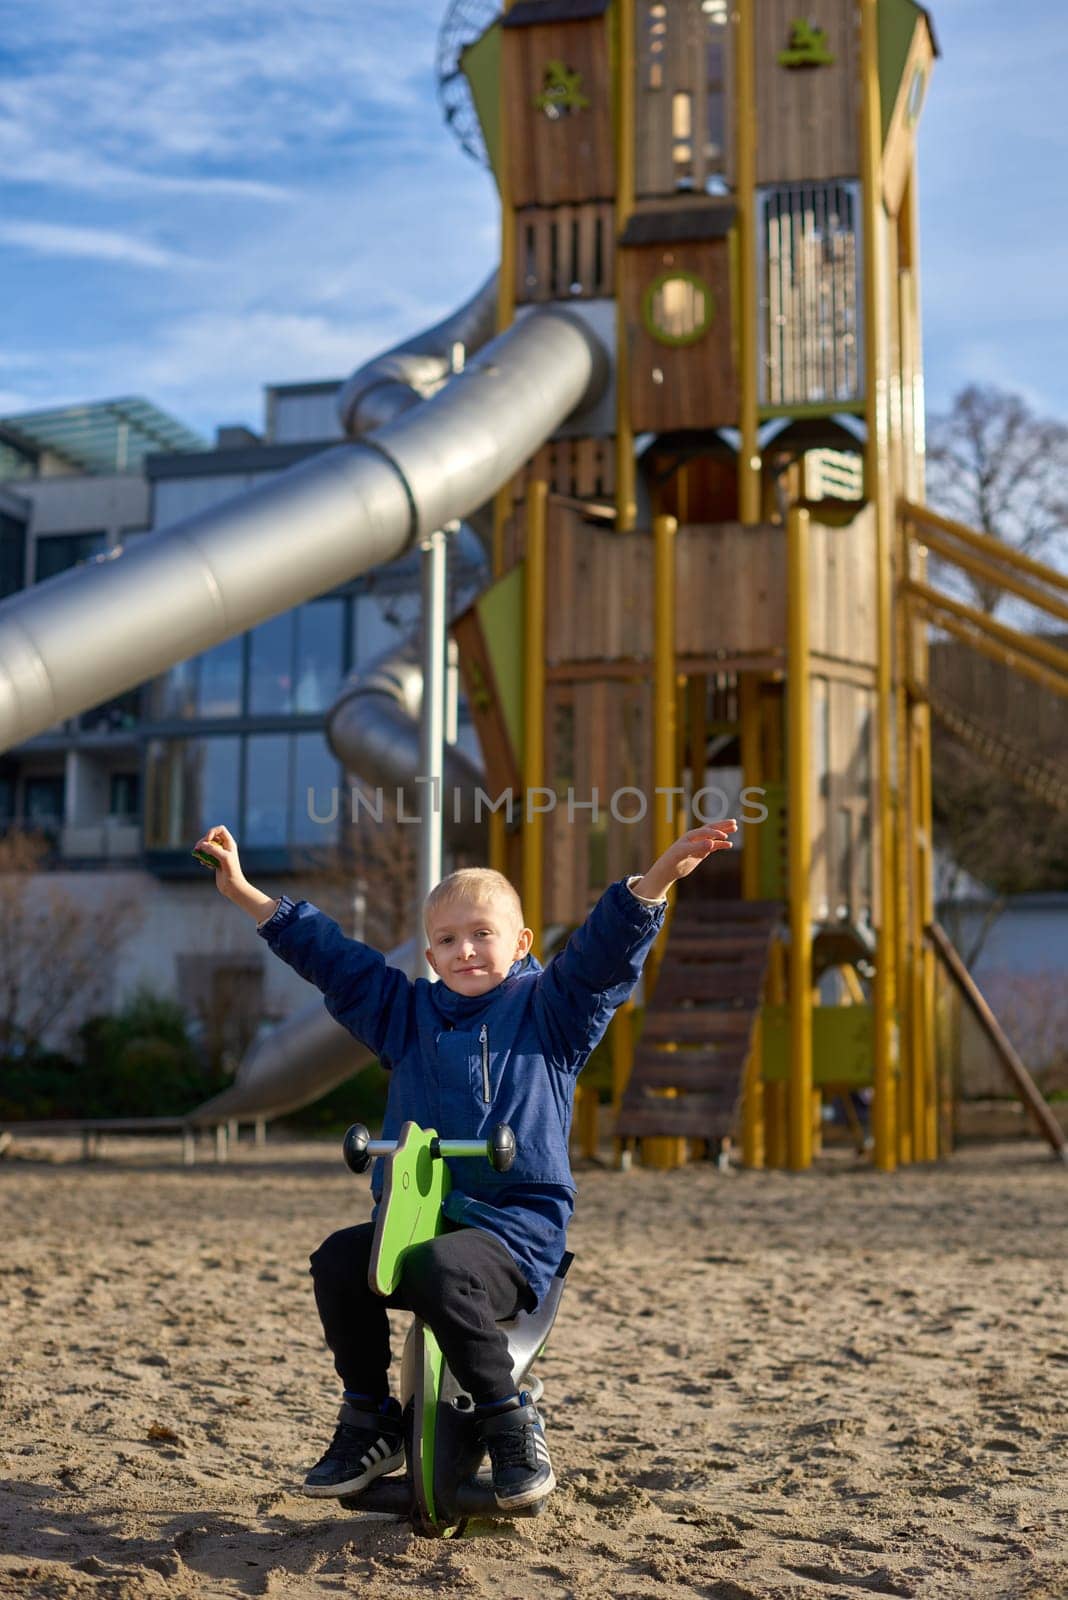 Childhood Joy: Beautiful 8-Year-Old Boy in Jacket Swinging on Horse-Shaped Seesaw, Background of Playful Park in Bietigheim-Bissingen, Germany, Autumn. Capture the pure essence of childhood happiness with this heartwarming image featuring a beautiful 8-year-old boy in a jacket, joyfully seated on a horse-shaped seesaw against the backdrop of a playful park in Bietigheim-Bissingen, Germany. The autumnal colors add warmth to this delightful scene of youthful innocence.